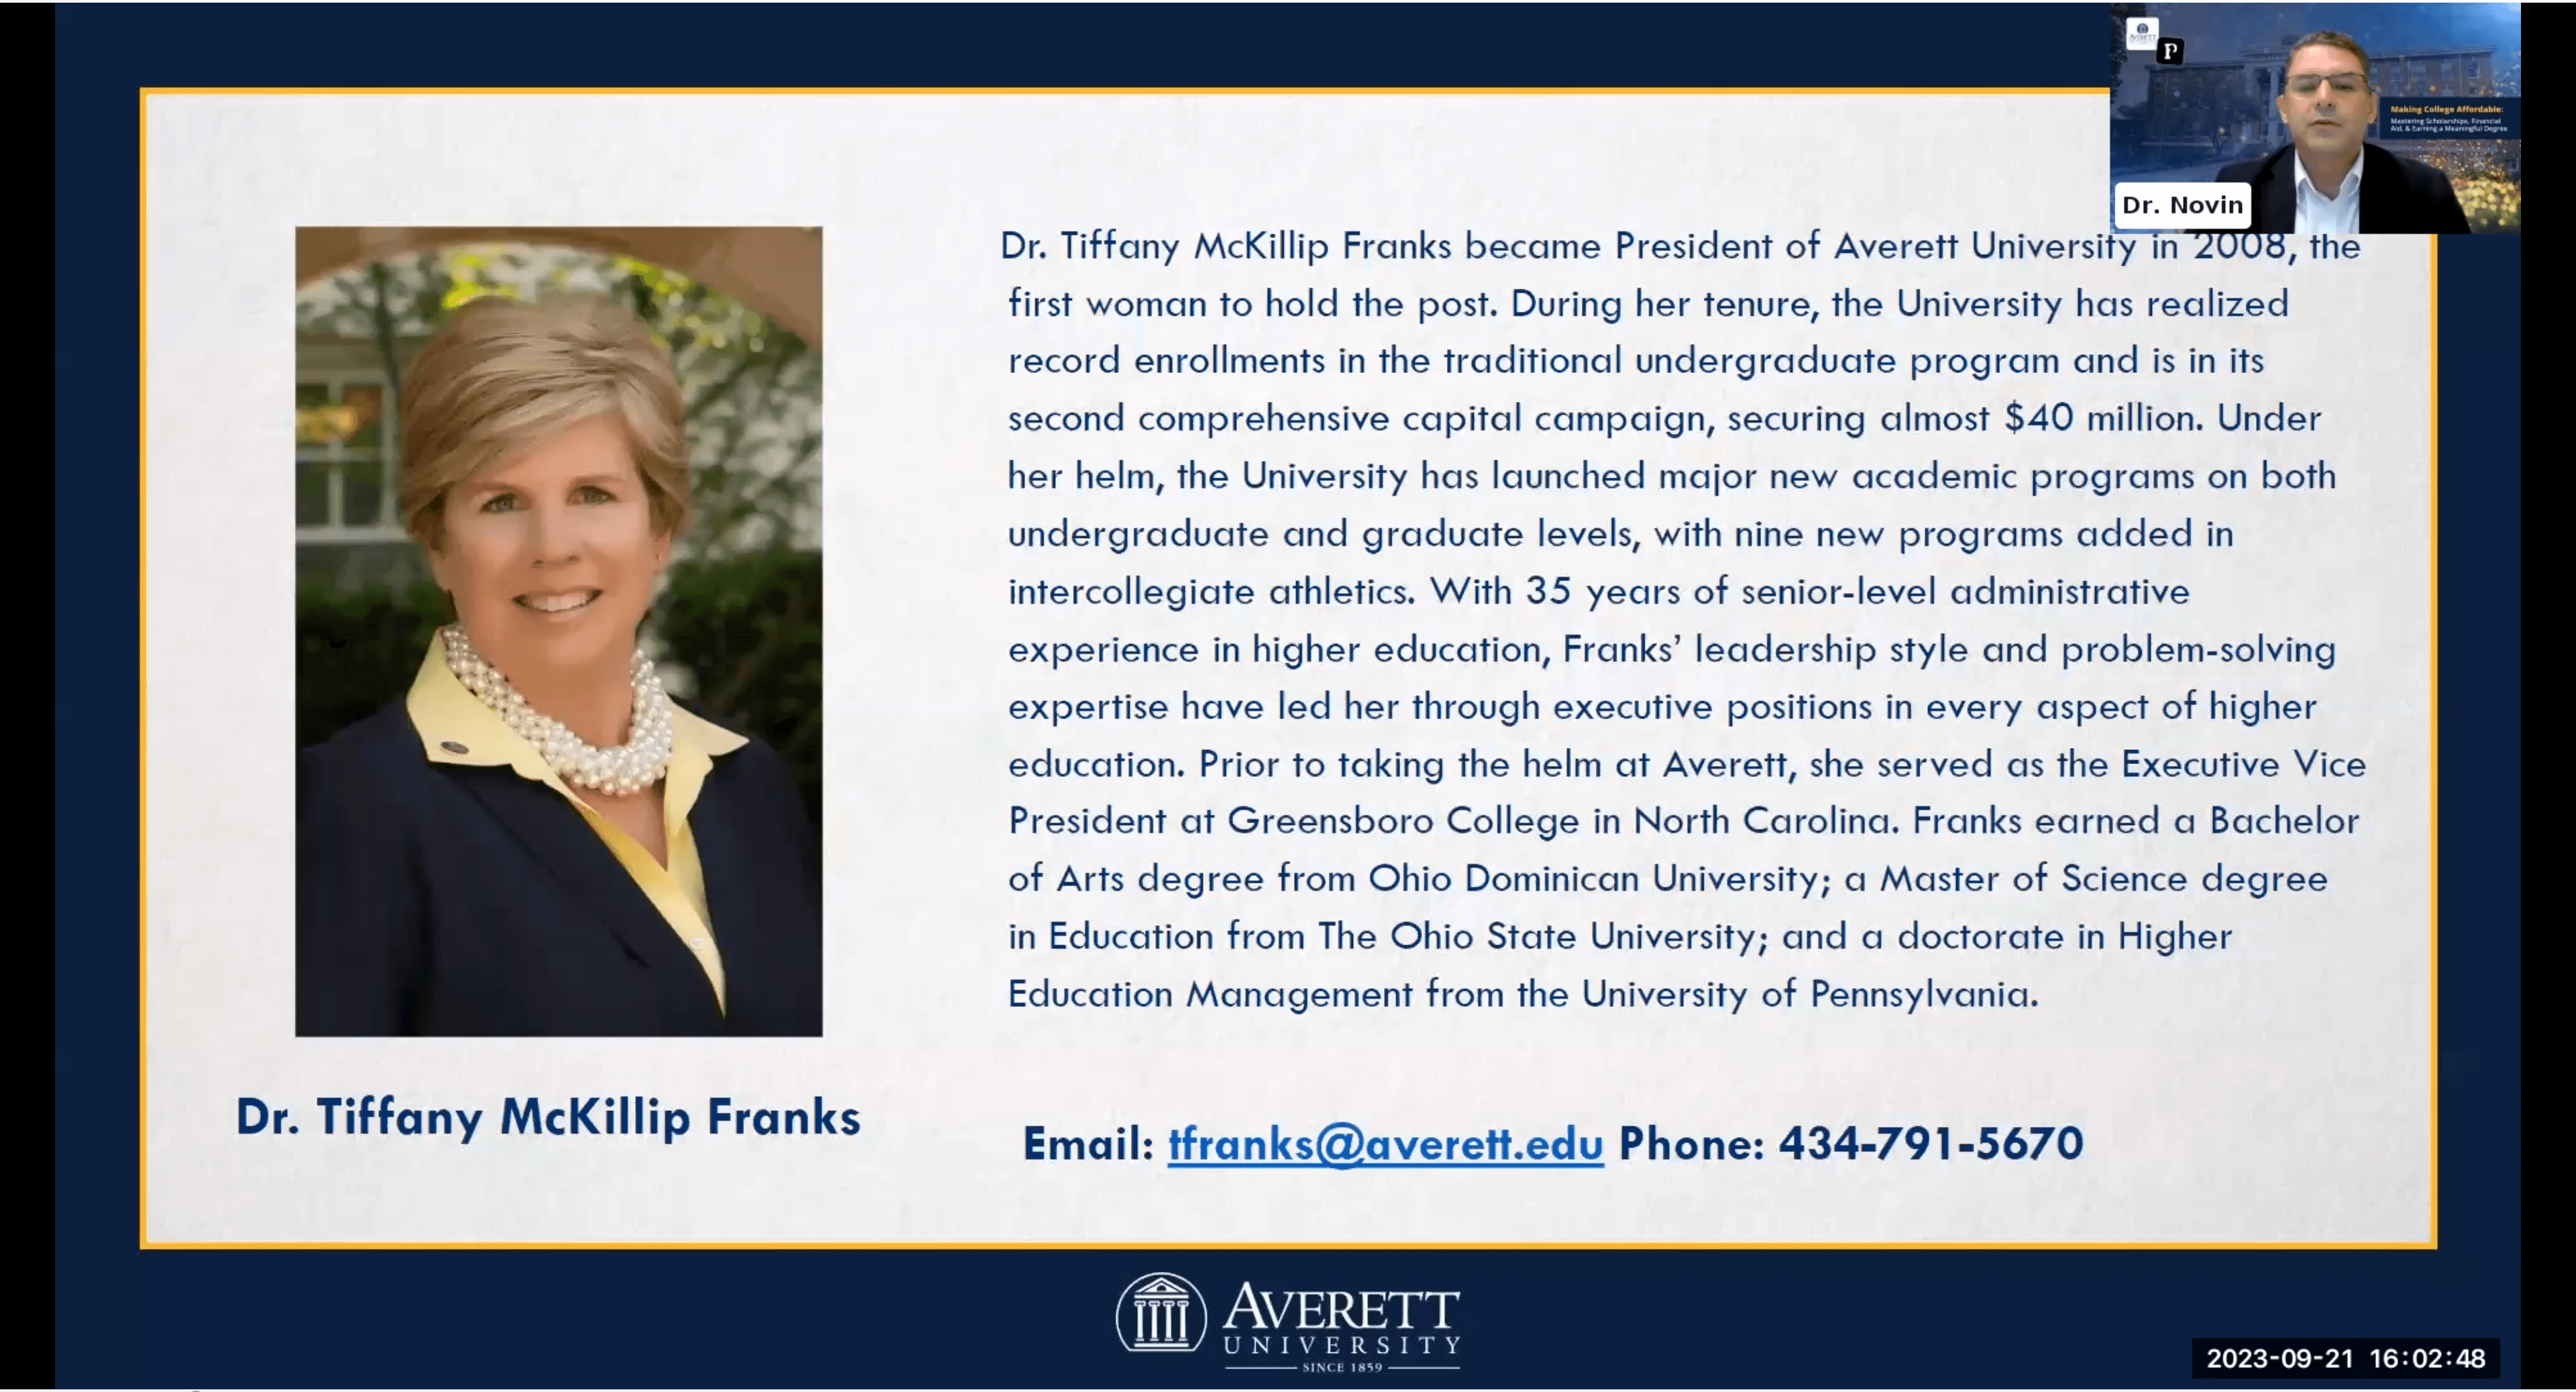 Welcome message to distinguished experts at Plexuss event, inviting Dr. Franks to begin her presenta